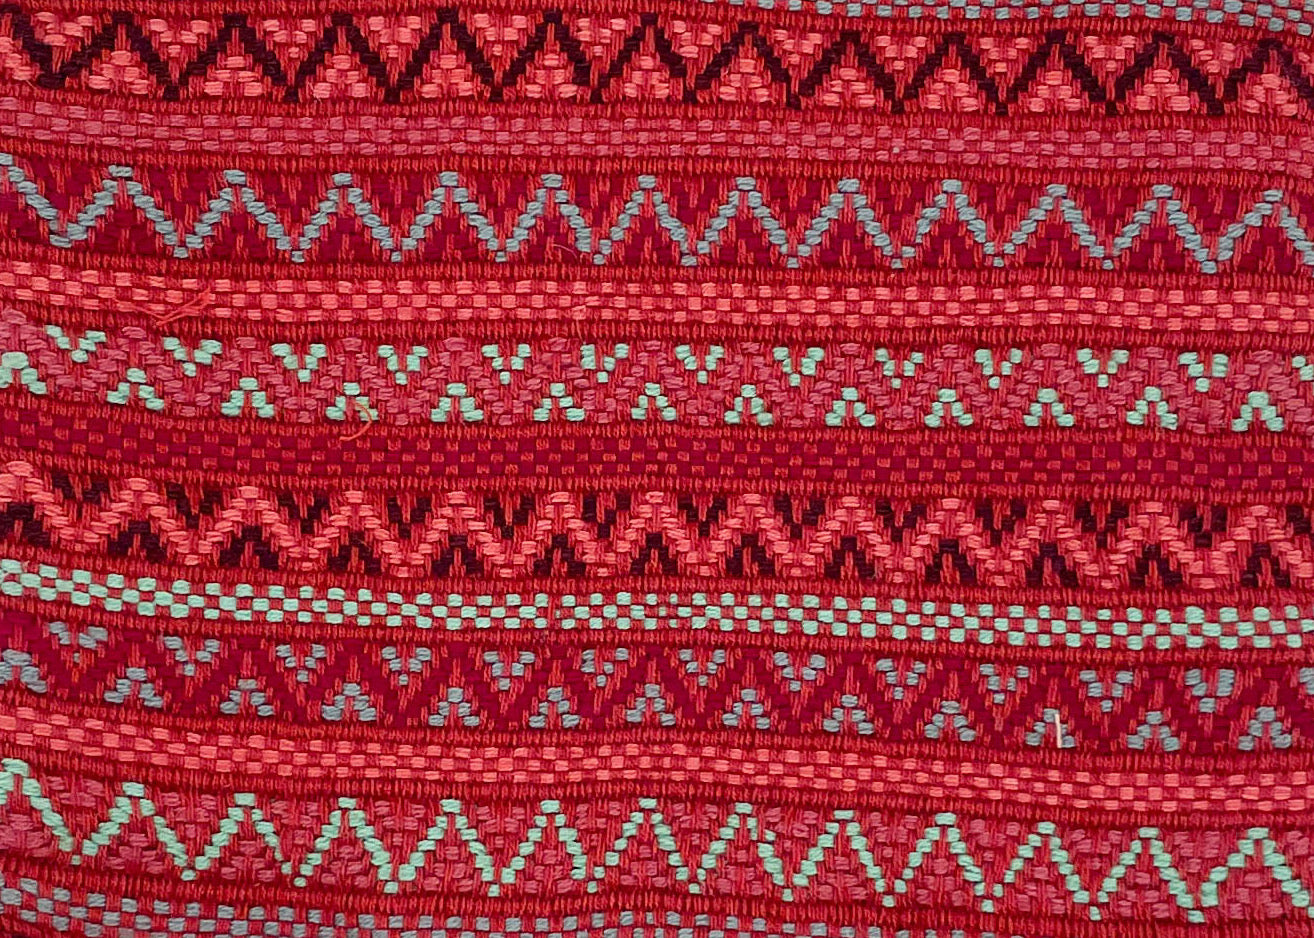 Close-up image of red handwoven brocade textile with intricate, dense brocade geometric designs